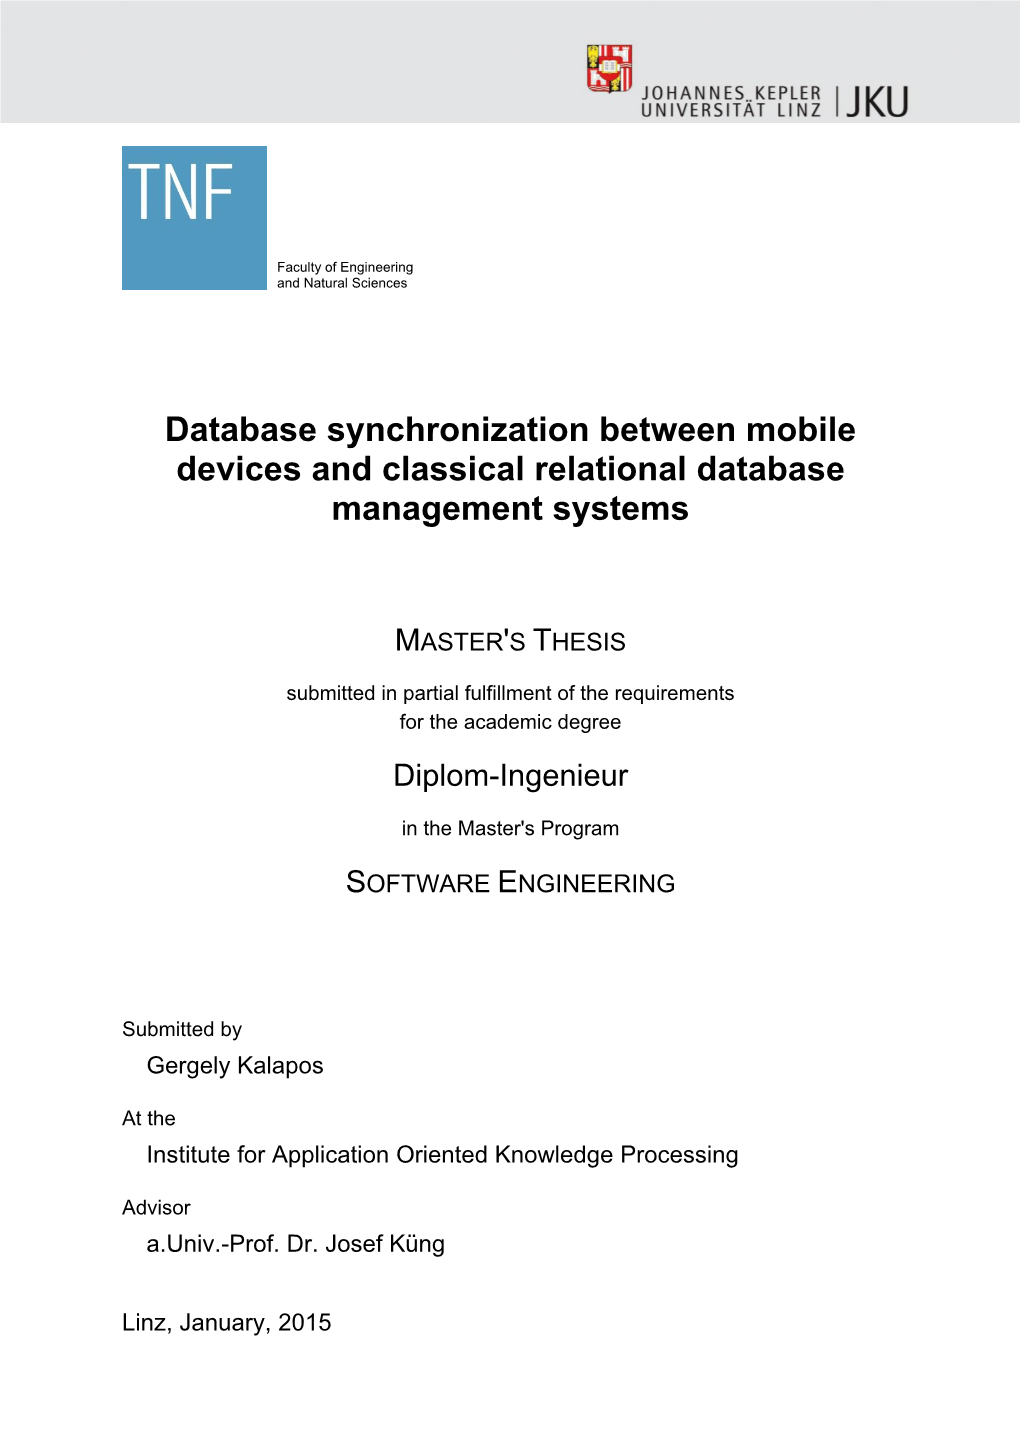 Database Synchronization Between Mobile Devices and Classical Relational Database Management Systems